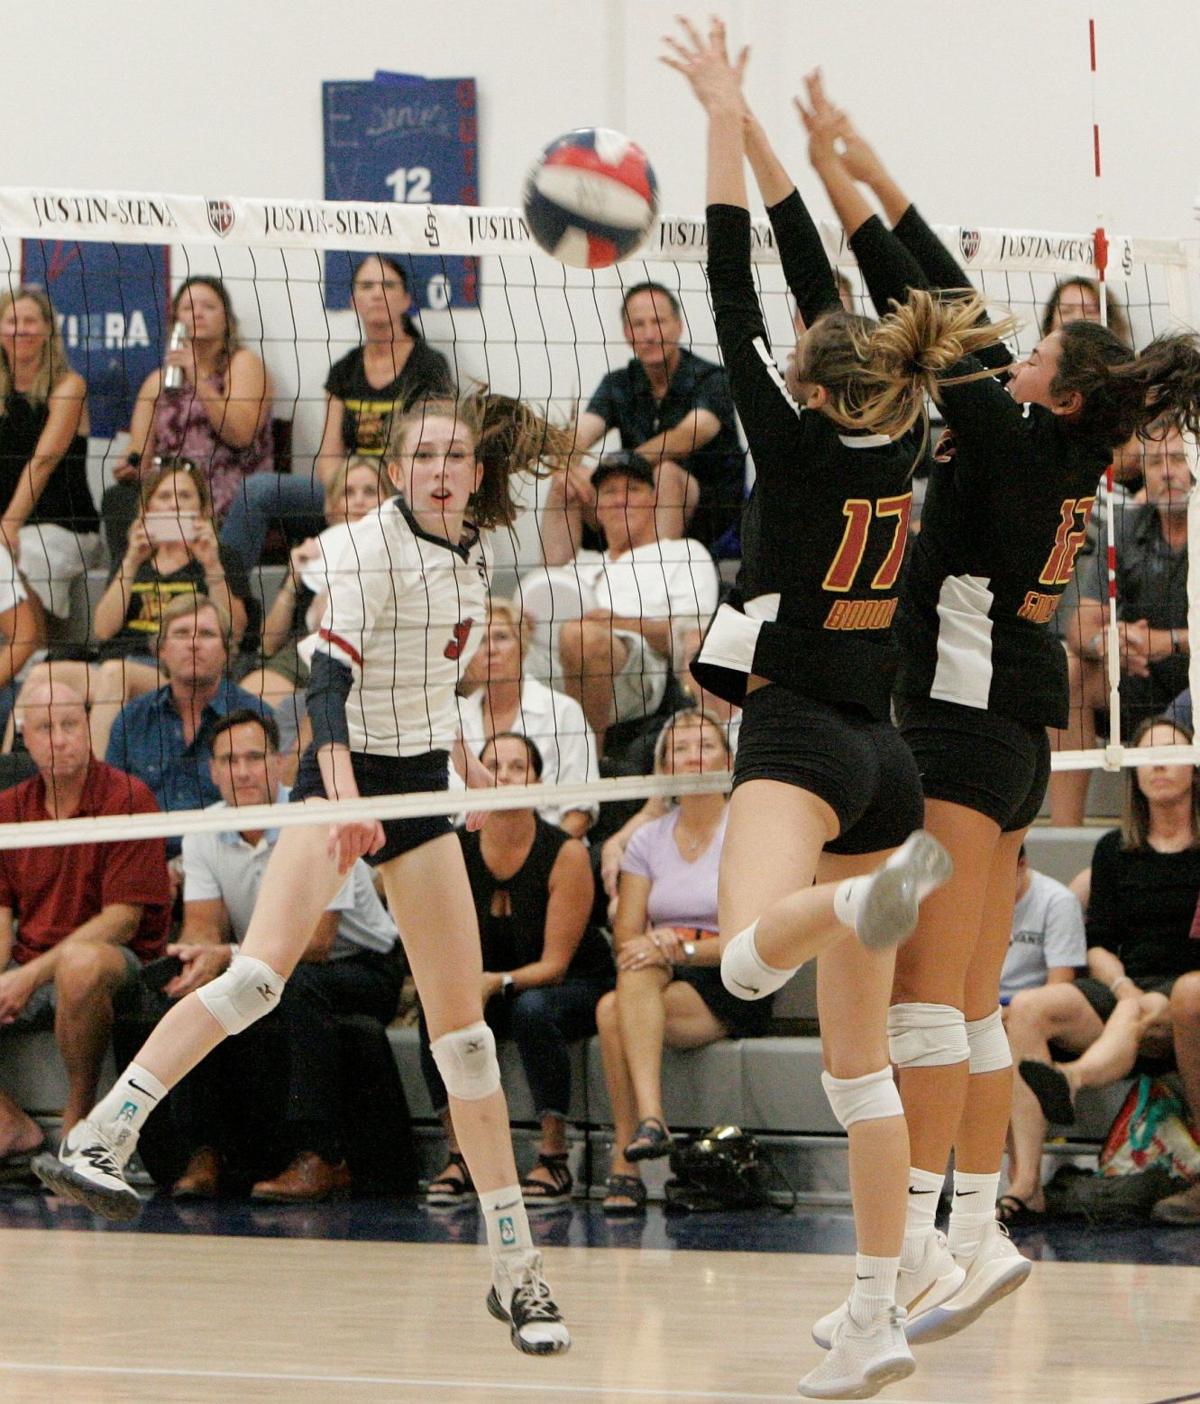 Justin Siena Volleyball Outlook: Braves stay on top after star